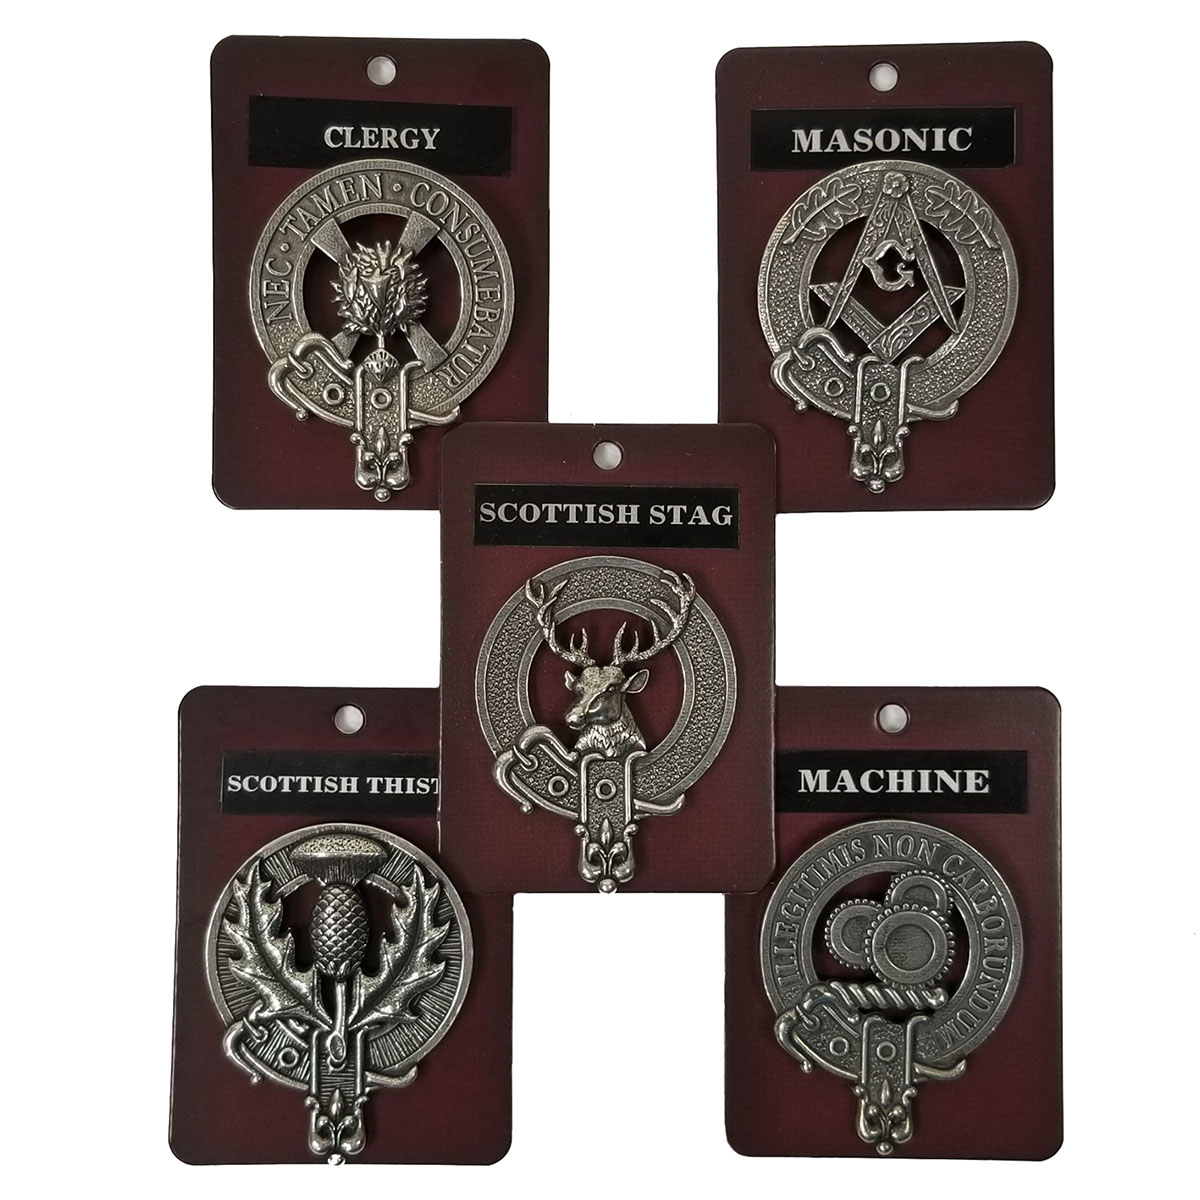 Five assorted cap badges from the "Assorted Cap Badges/Brooches" collection, mounted on red and black cards. Each badge is labeled as "Clergy," "Masonic," "Scottish Stag," "Scottish Thistle," and "Machine," and features unique emblems corresponding to its label.